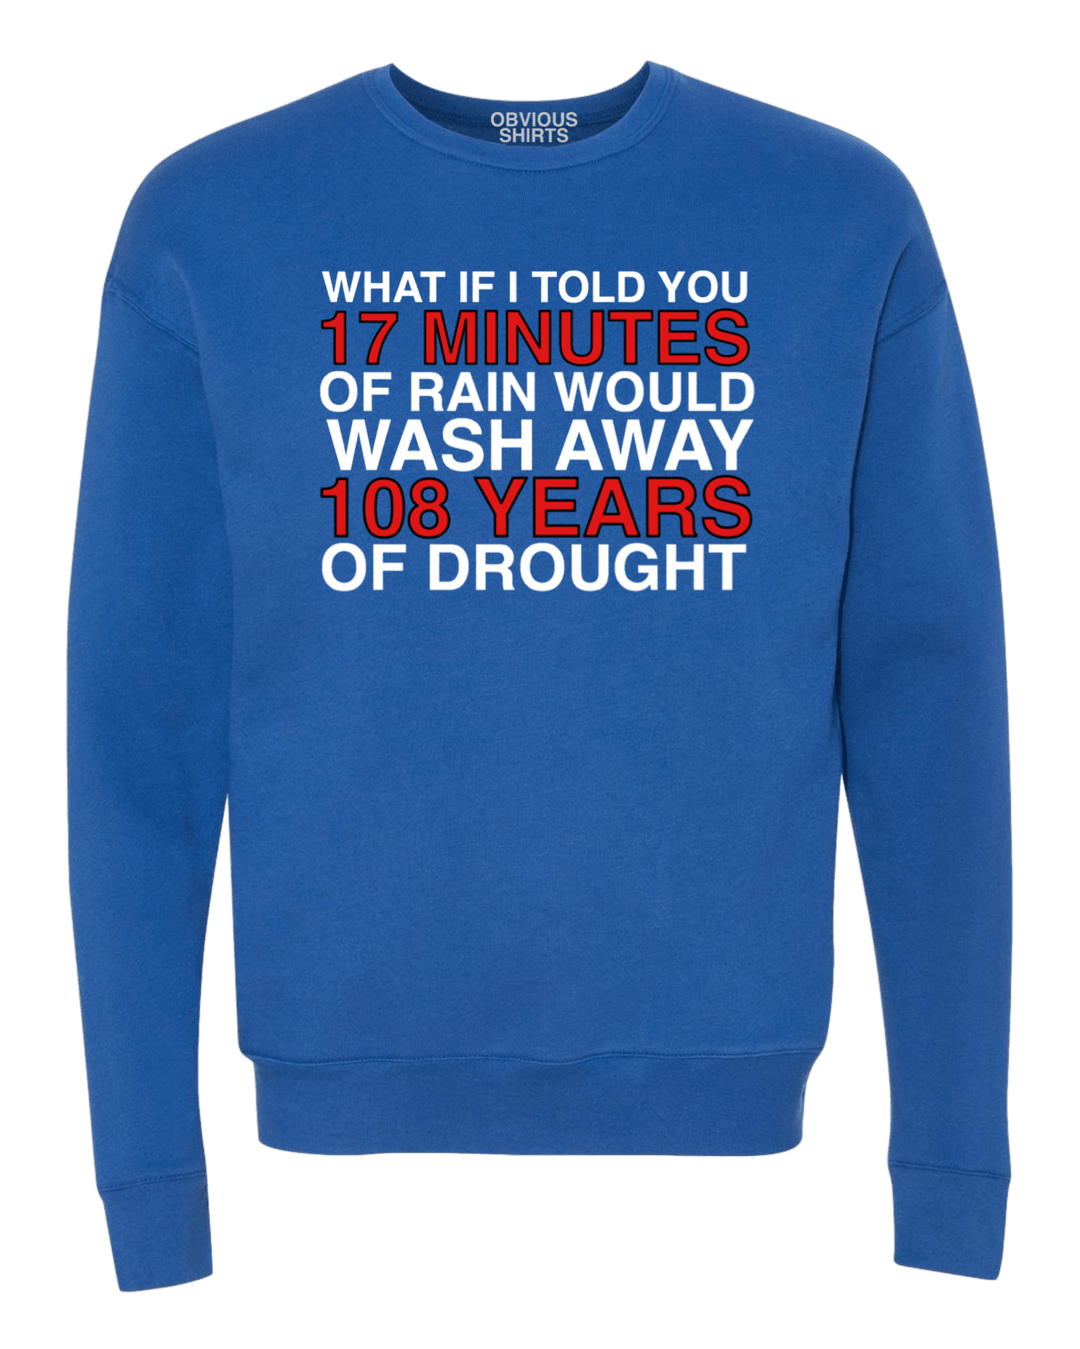 WHAT IF I TOLD YOU...(CREW NECK SWEATSHIRT) - OBVIOUS SHIRTS.